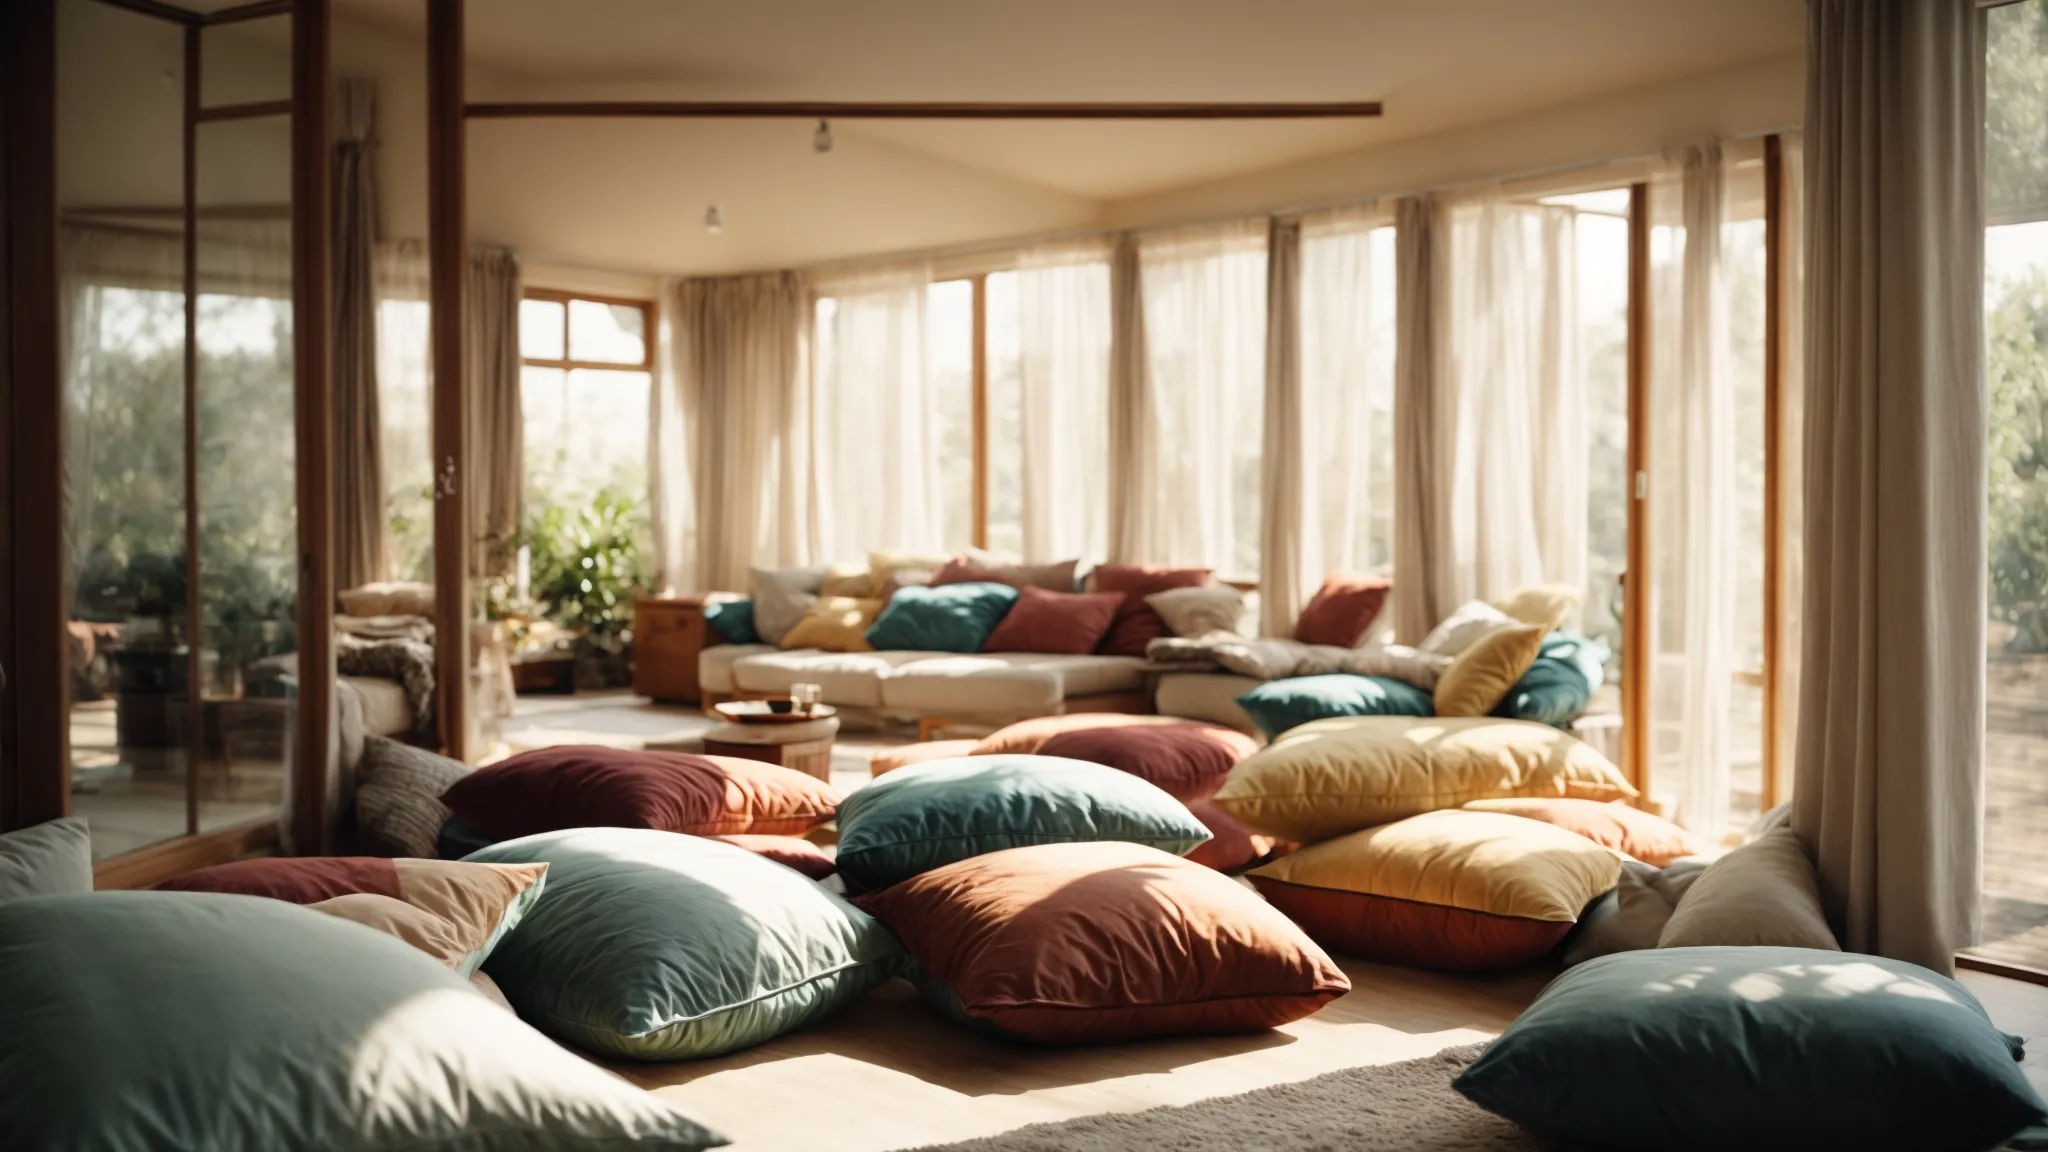 a serene room filled with cushions on the floor and soft, natural light beaming through large windows.